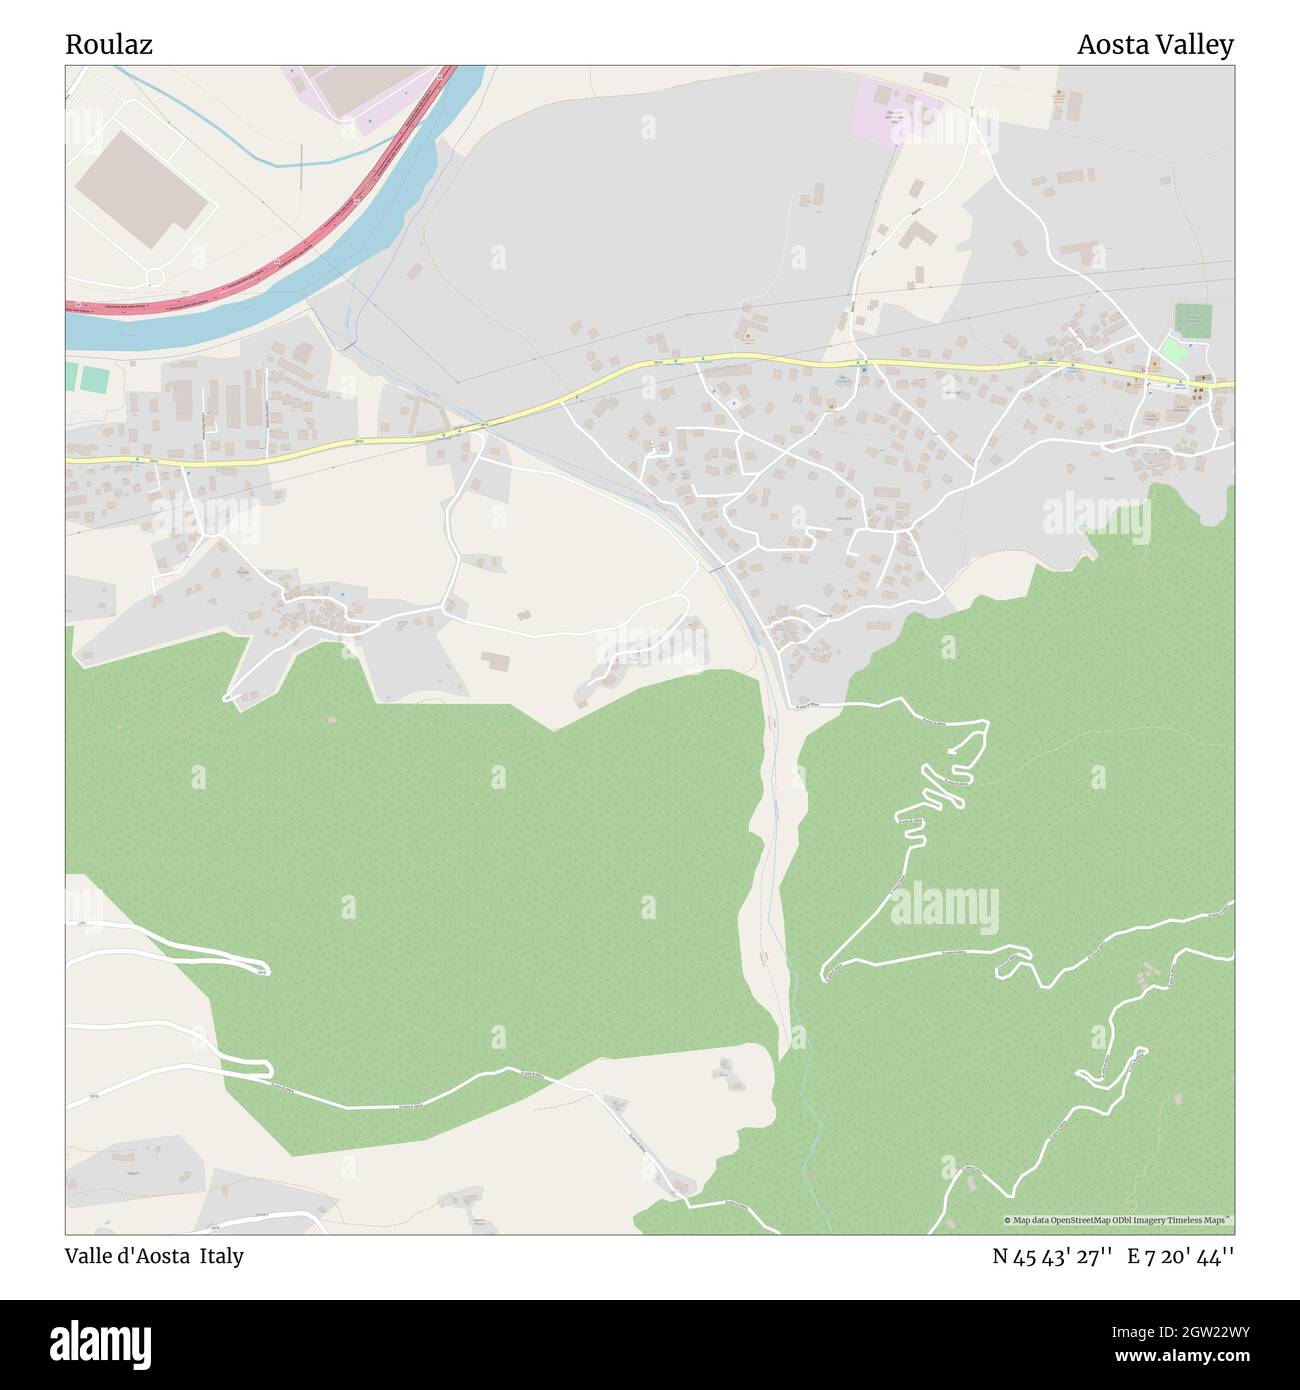 Roulaz, Valle d'Aosta, Italy, Aosta Valley, N 45 43' 27'', E 7 20' 44'', map, Timeless Map published in 2021. Travelers, explorers and adventurers like Florence Nightingale, David Livingstone, Ernest Shackleton, Lewis and Clark and Sherlock Holmes relied on maps to plan travels to the world's most remote corners, Timeless Maps is mapping most locations on the globe, showing the achievement of great dreams Stock Photo